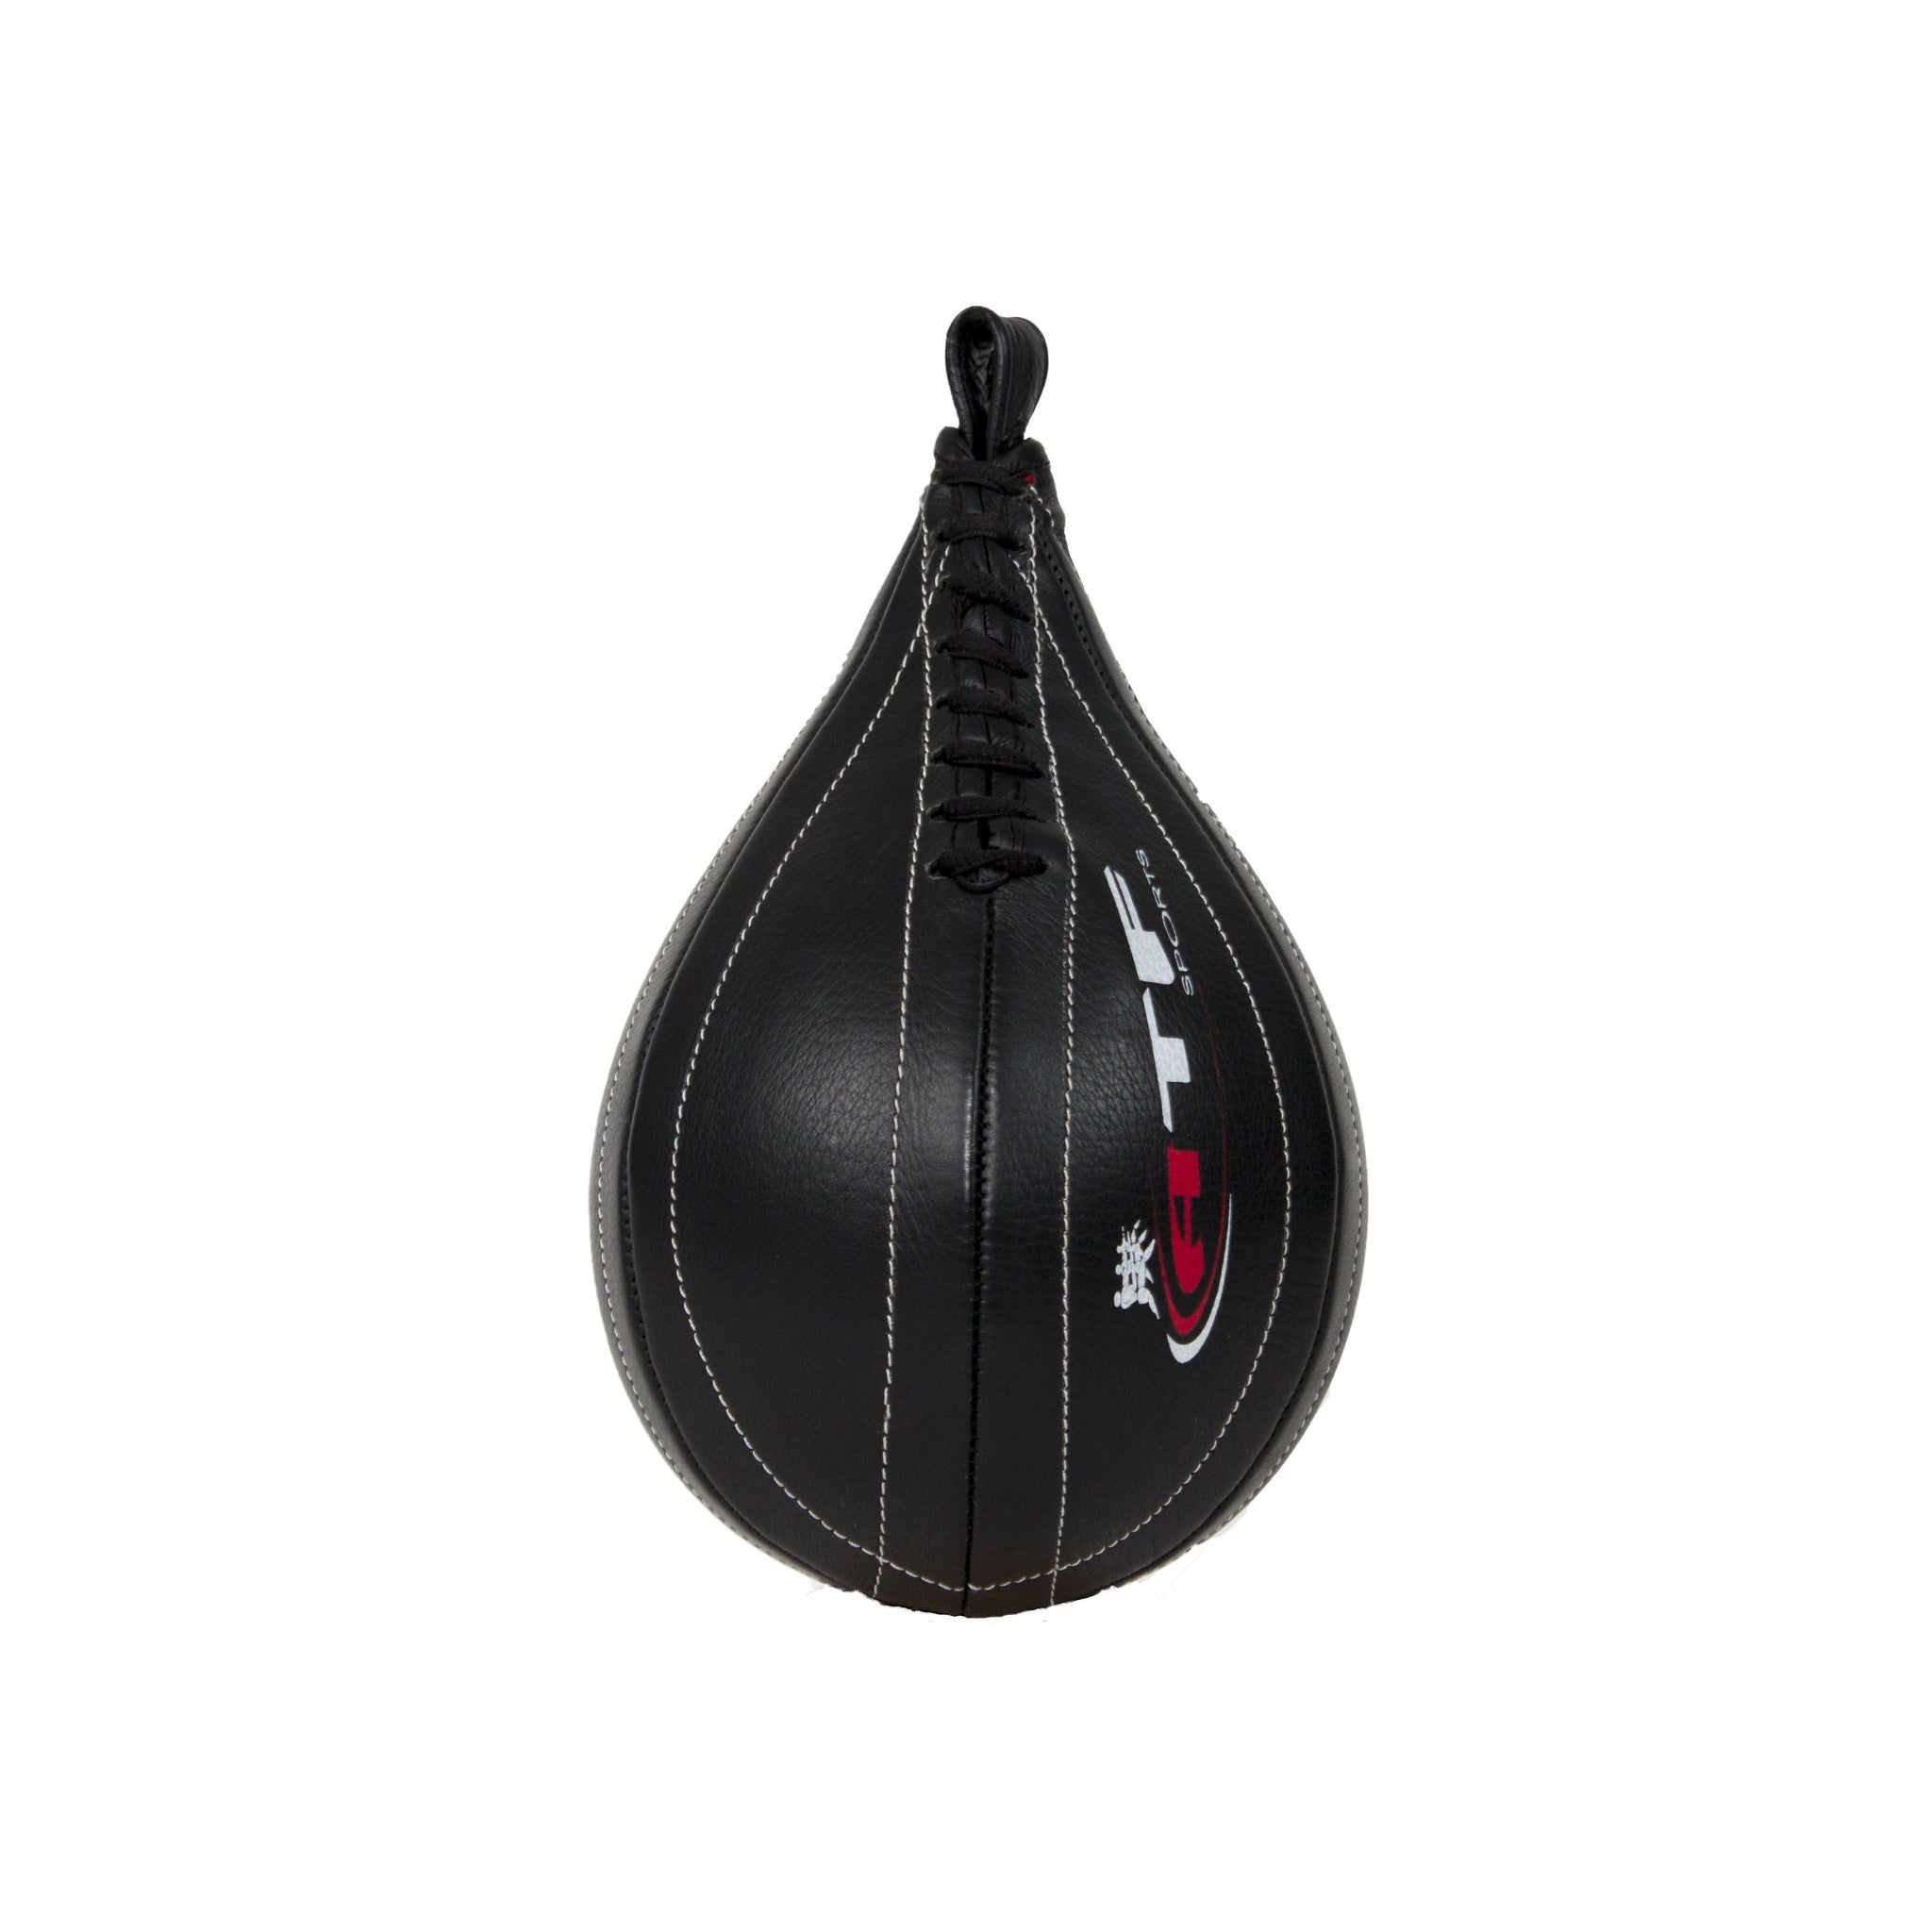 Leather Speed Bag | ATF Sports Inc. - Shop Boxing, Martial Arts & Fitness Equipment